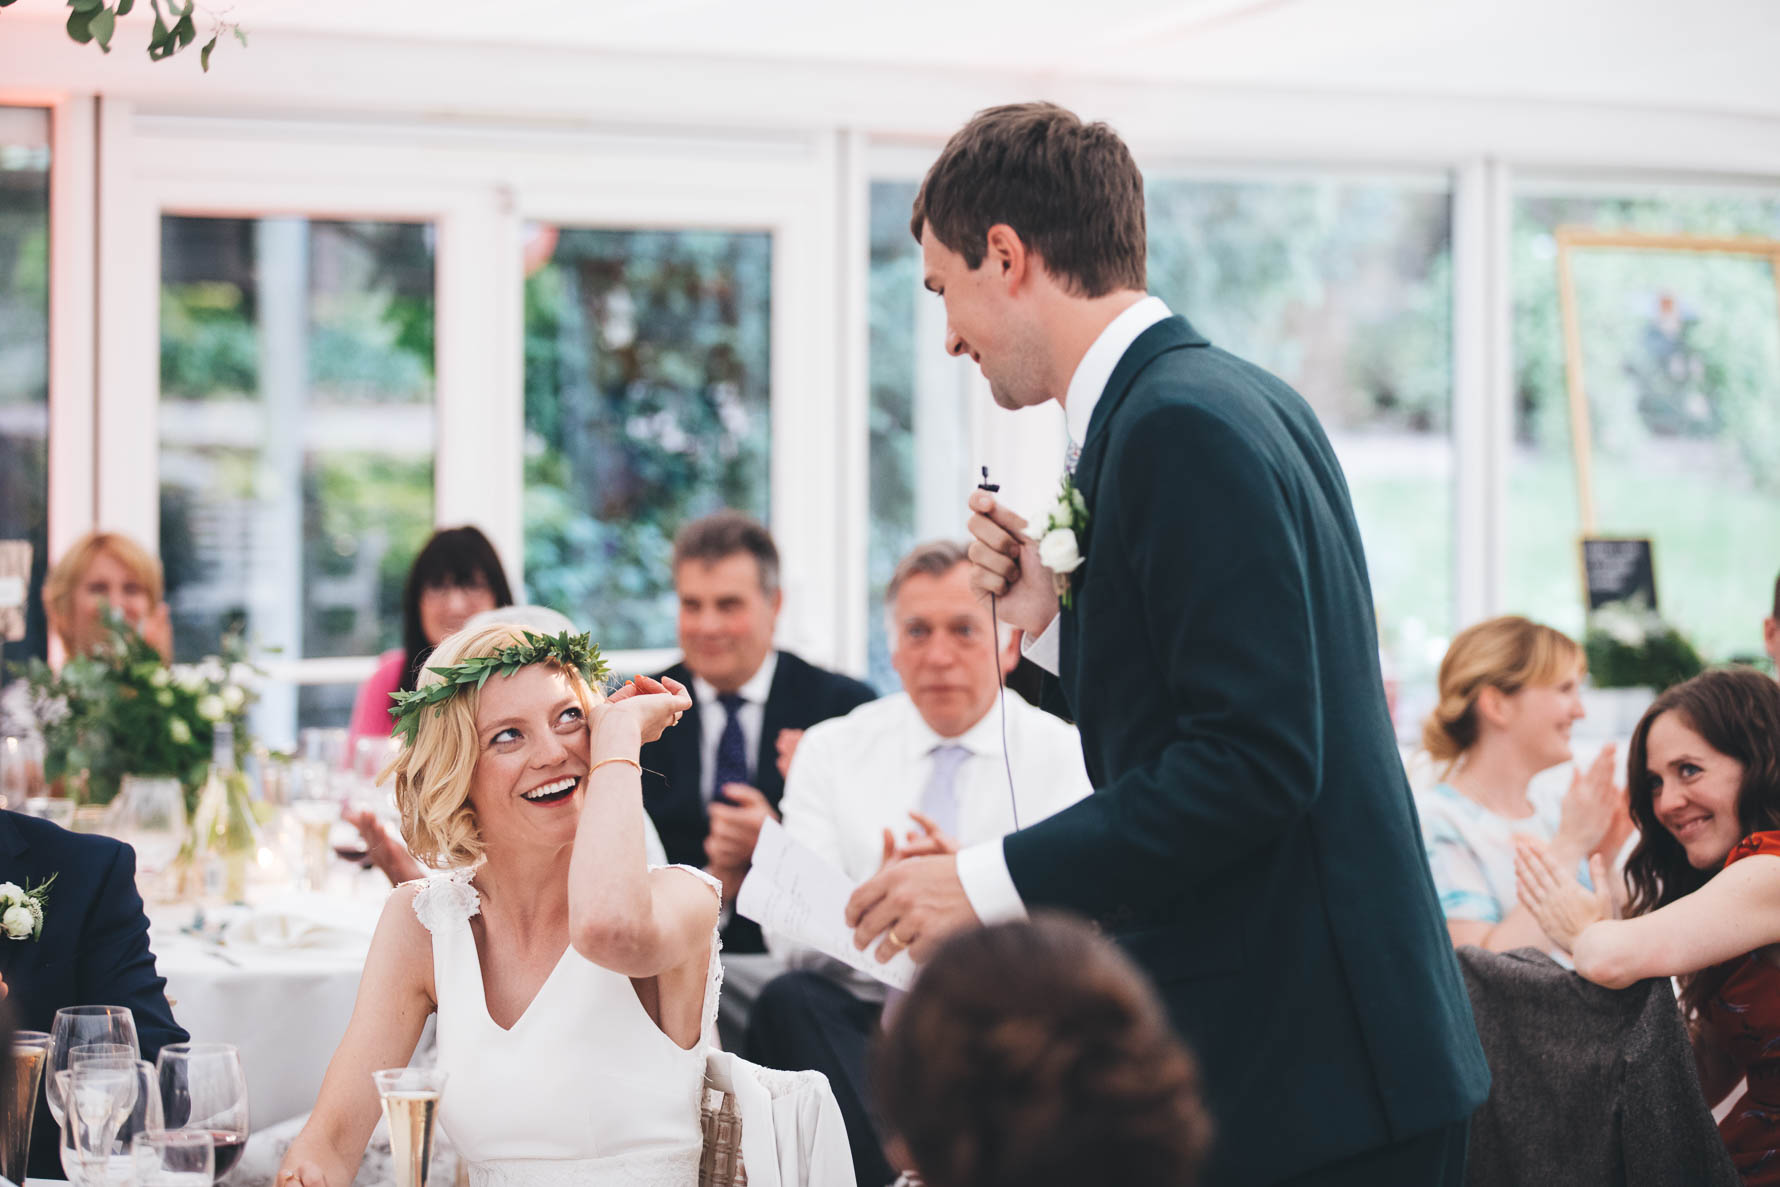 Groom stood in a marquee reading a speech as the bride is seated, wiping a tear away from her eye with members of the wedding party applauding in the background